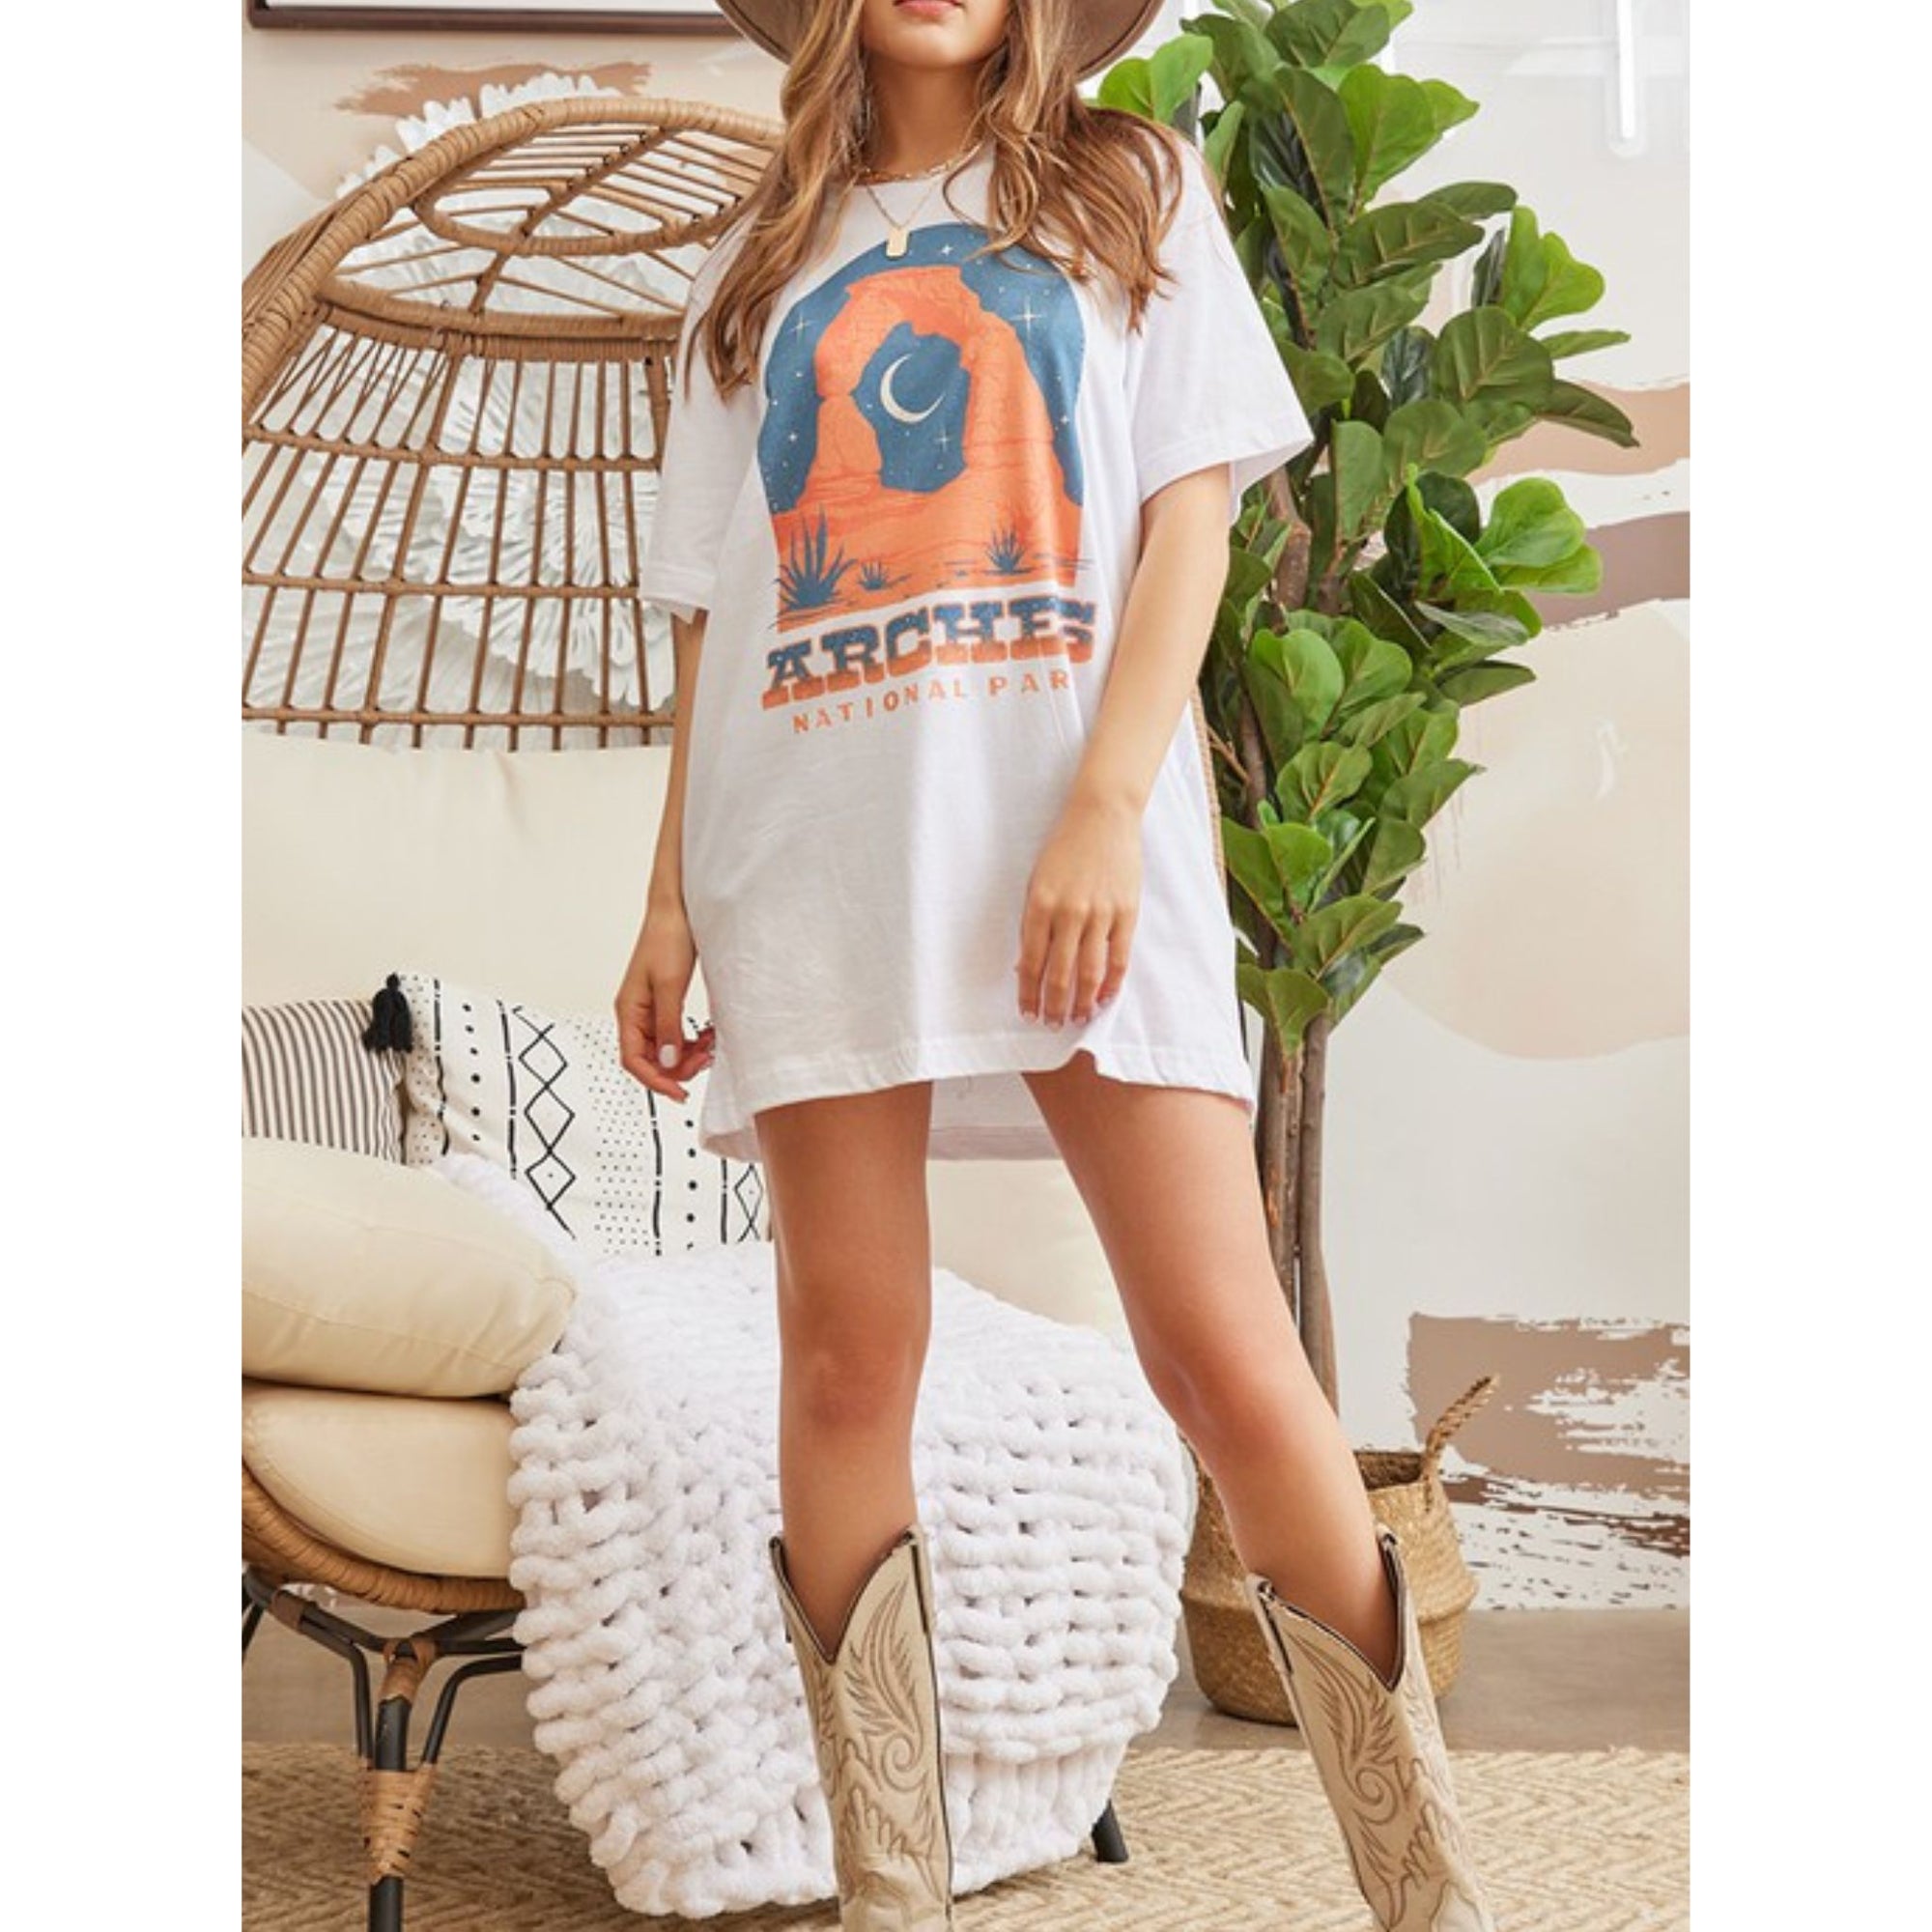 Arches Park Oversize Graphic Tee